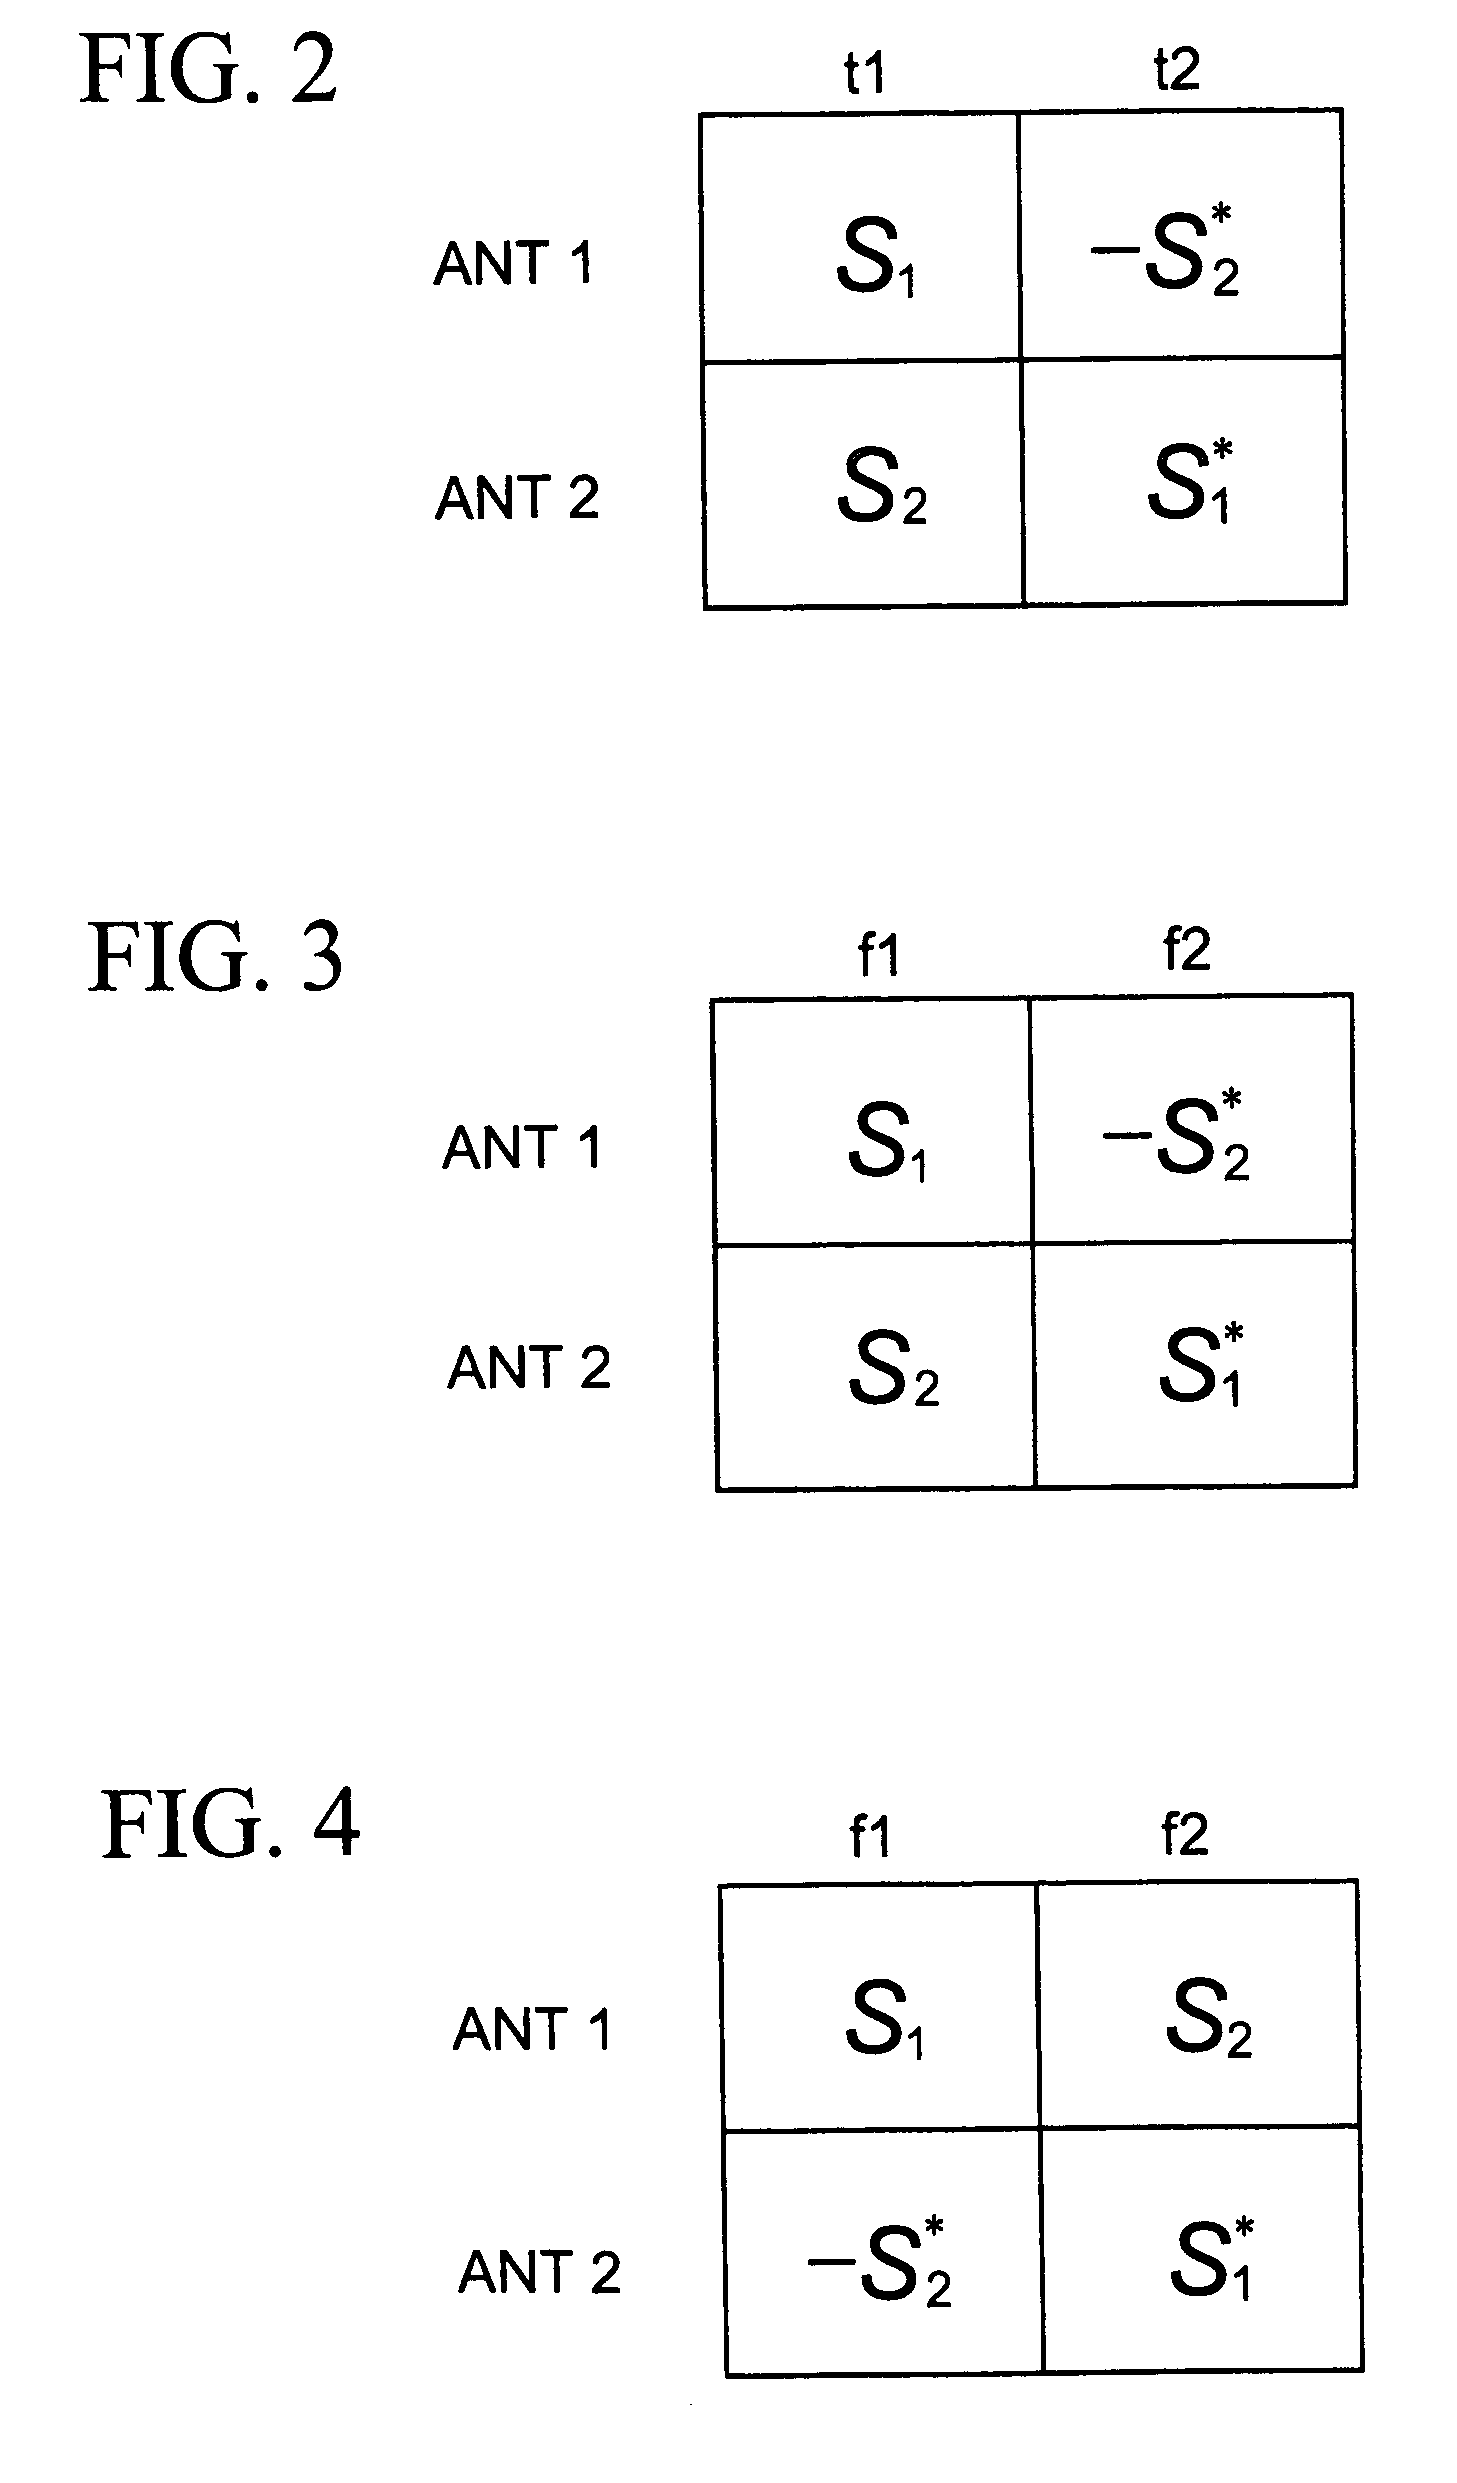 Pilot boosting and traffic to pilot ratio estimation in a wireless communication system